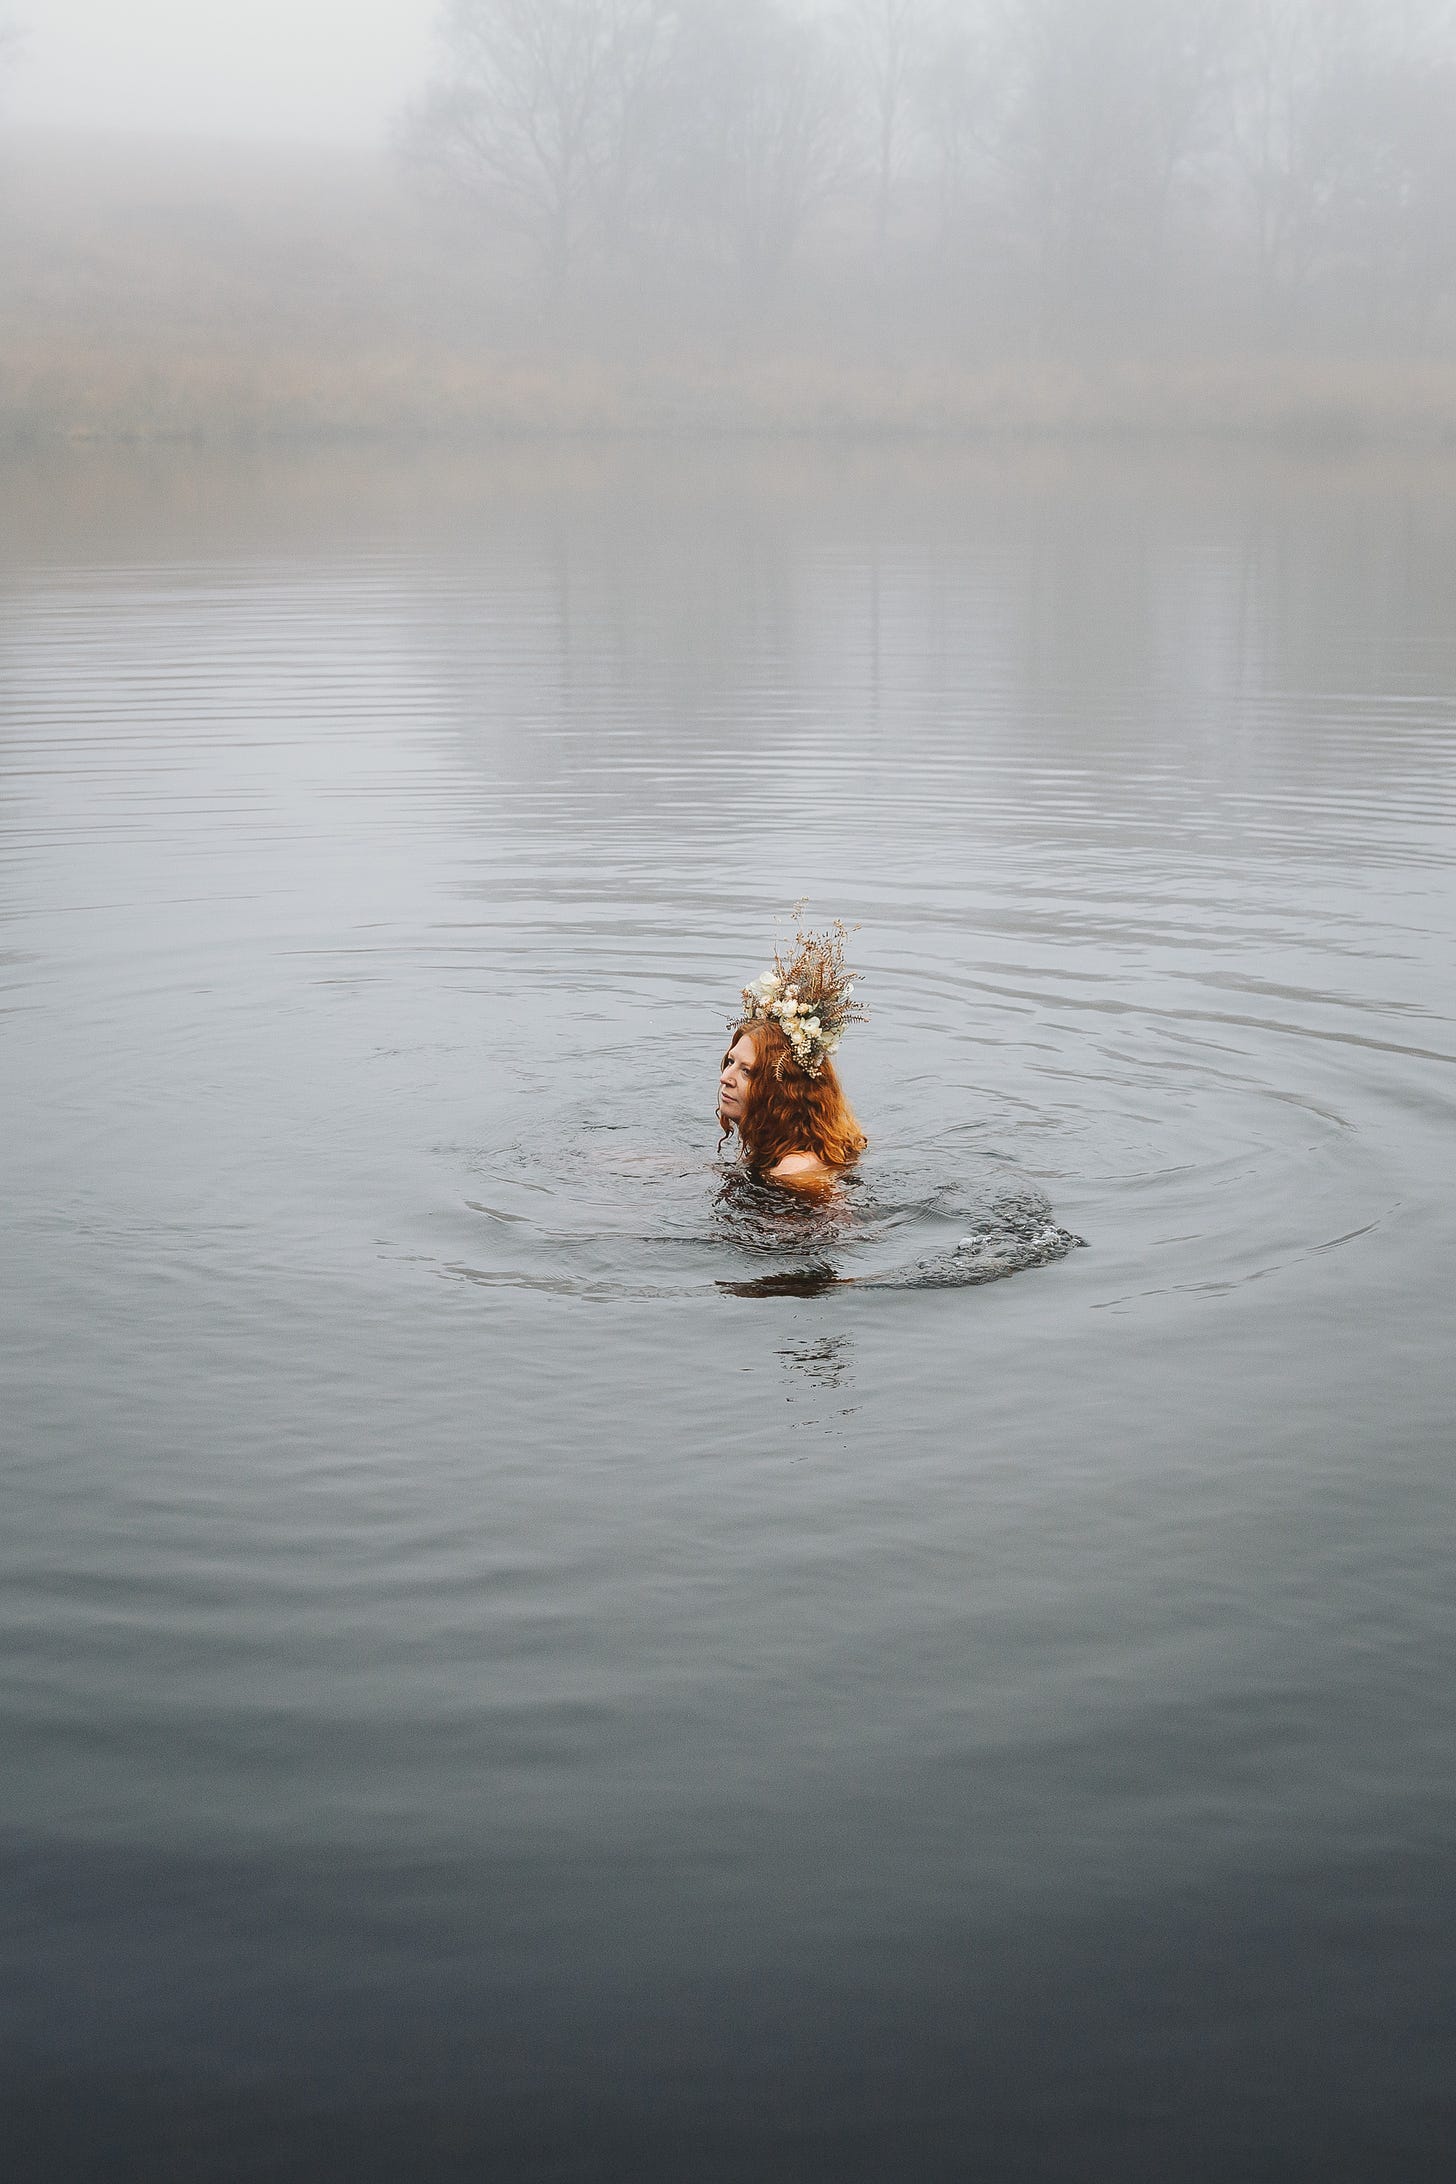 A woman wears a flower crown and is up to her neck in water. The pond is misty and there are faint trees in the background.